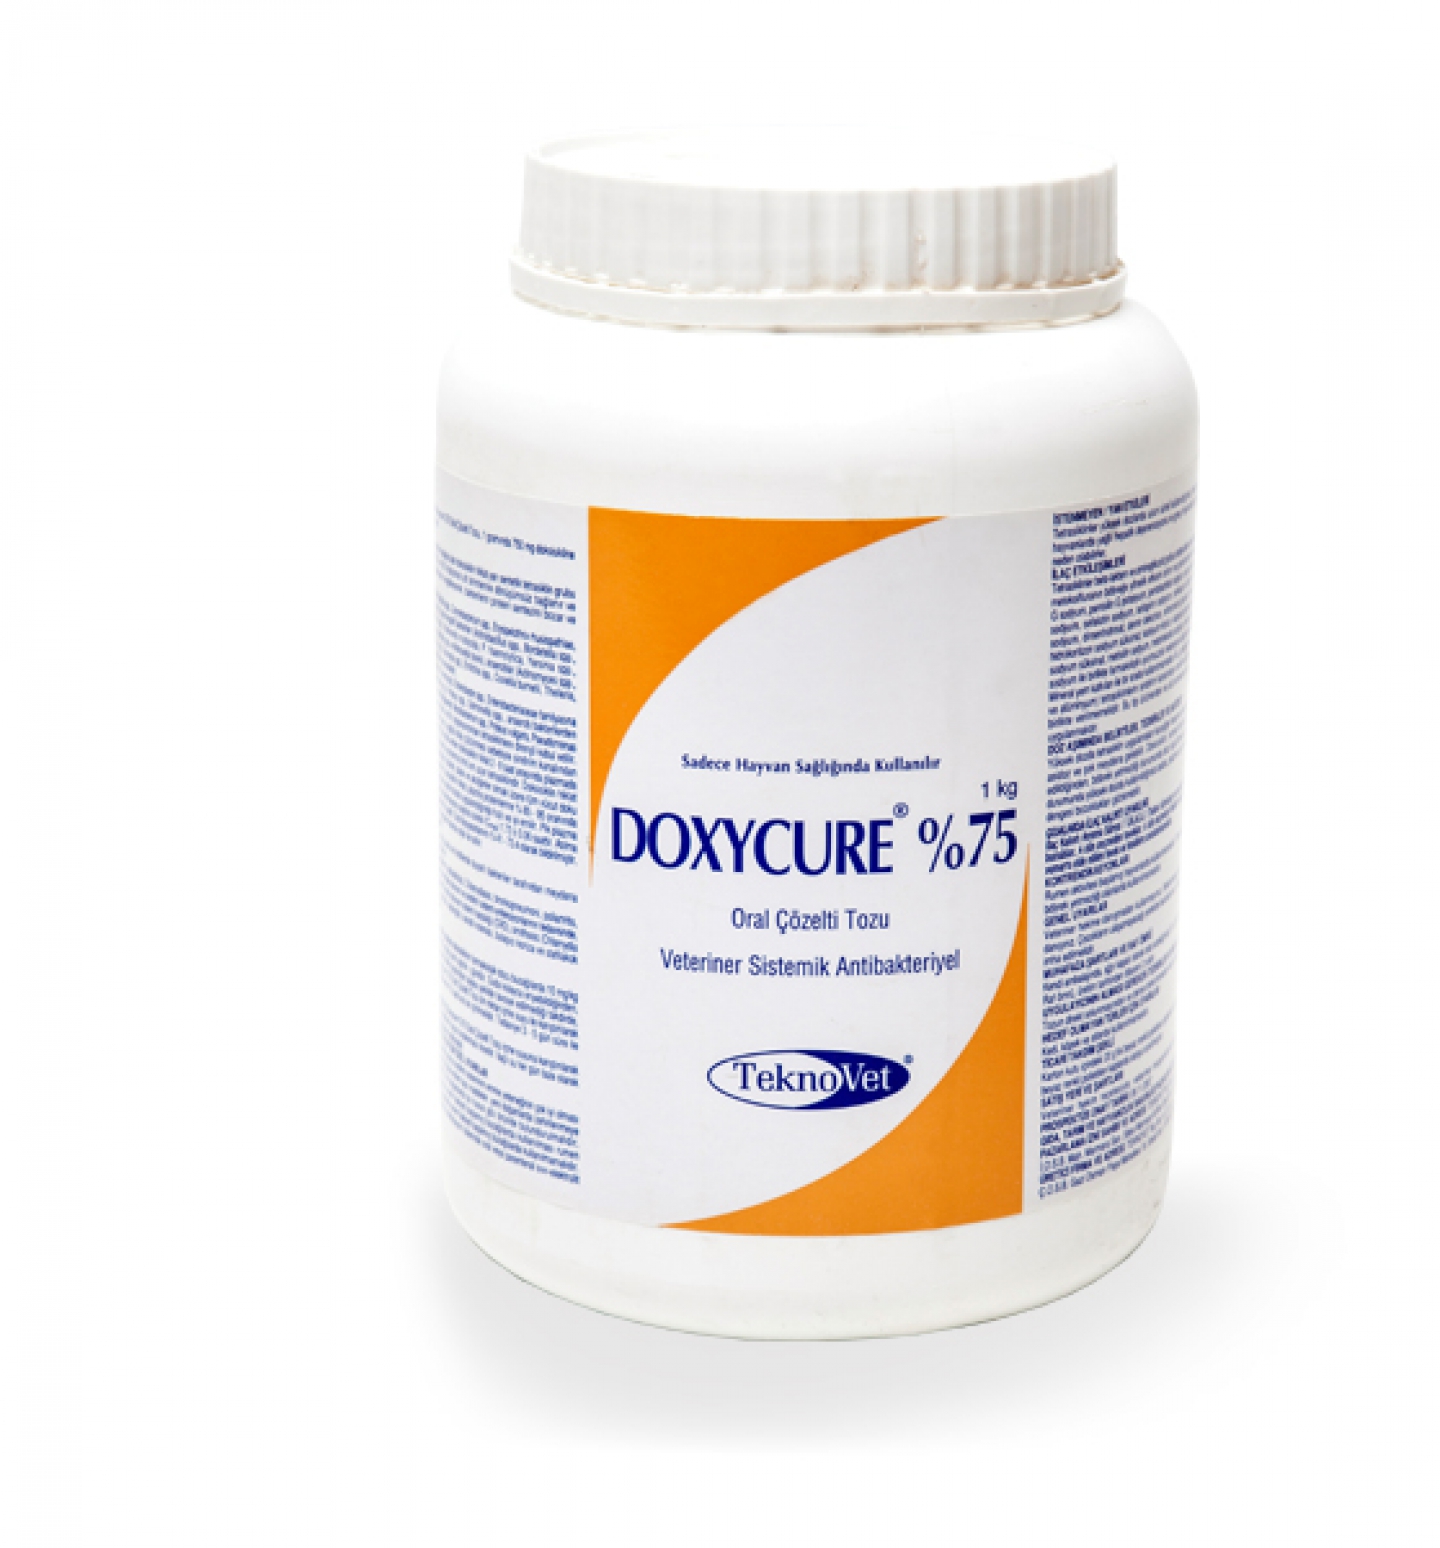 Doxycure %75